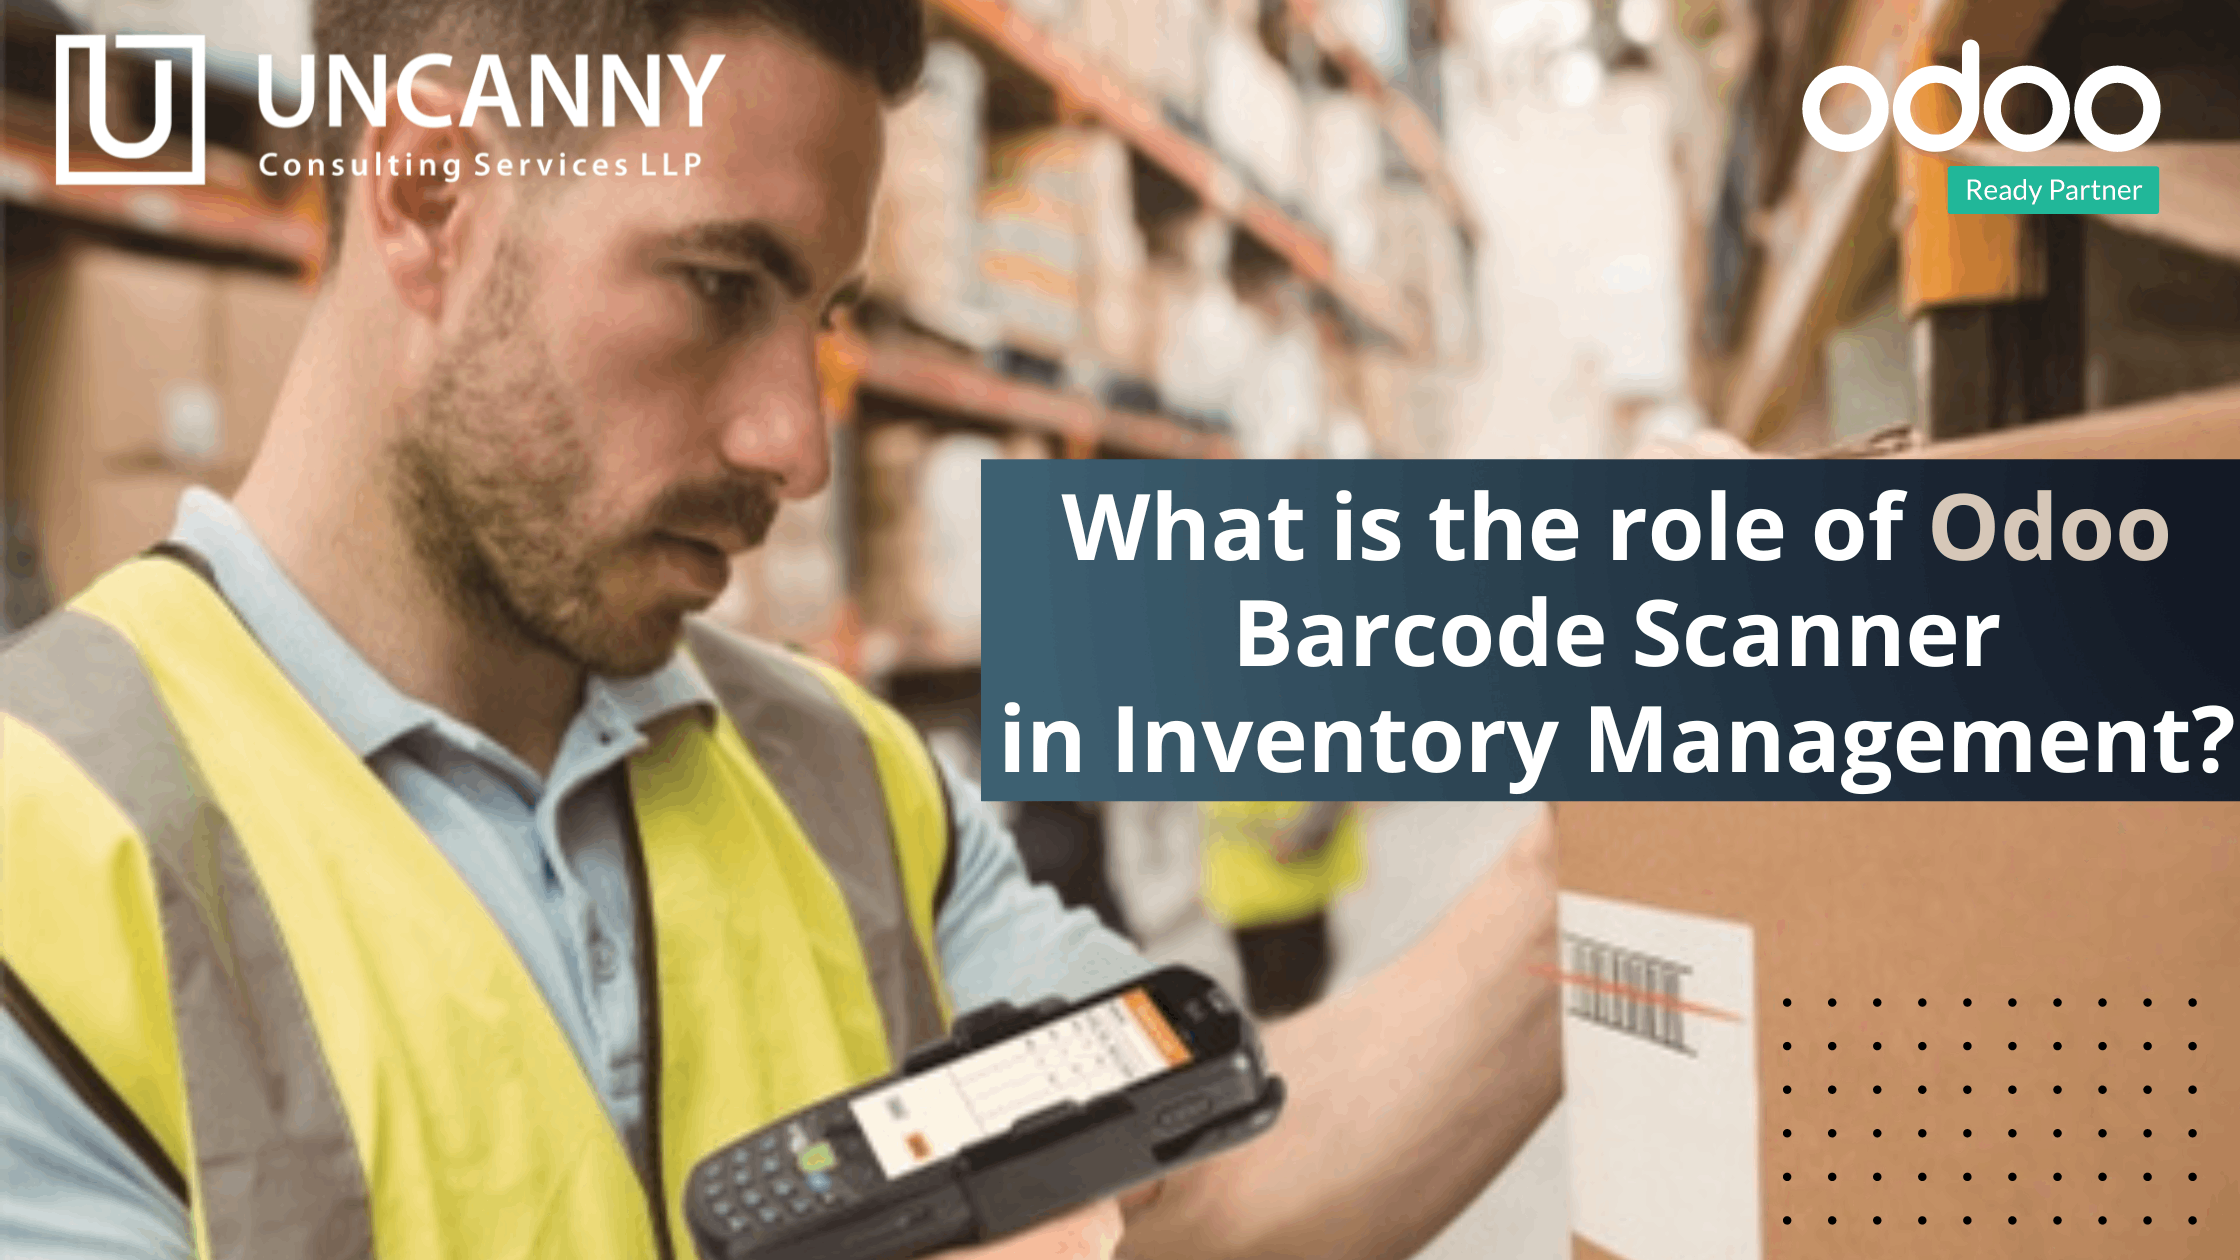 What is the role of Odoo Barcode Scanner in Inventory Management?